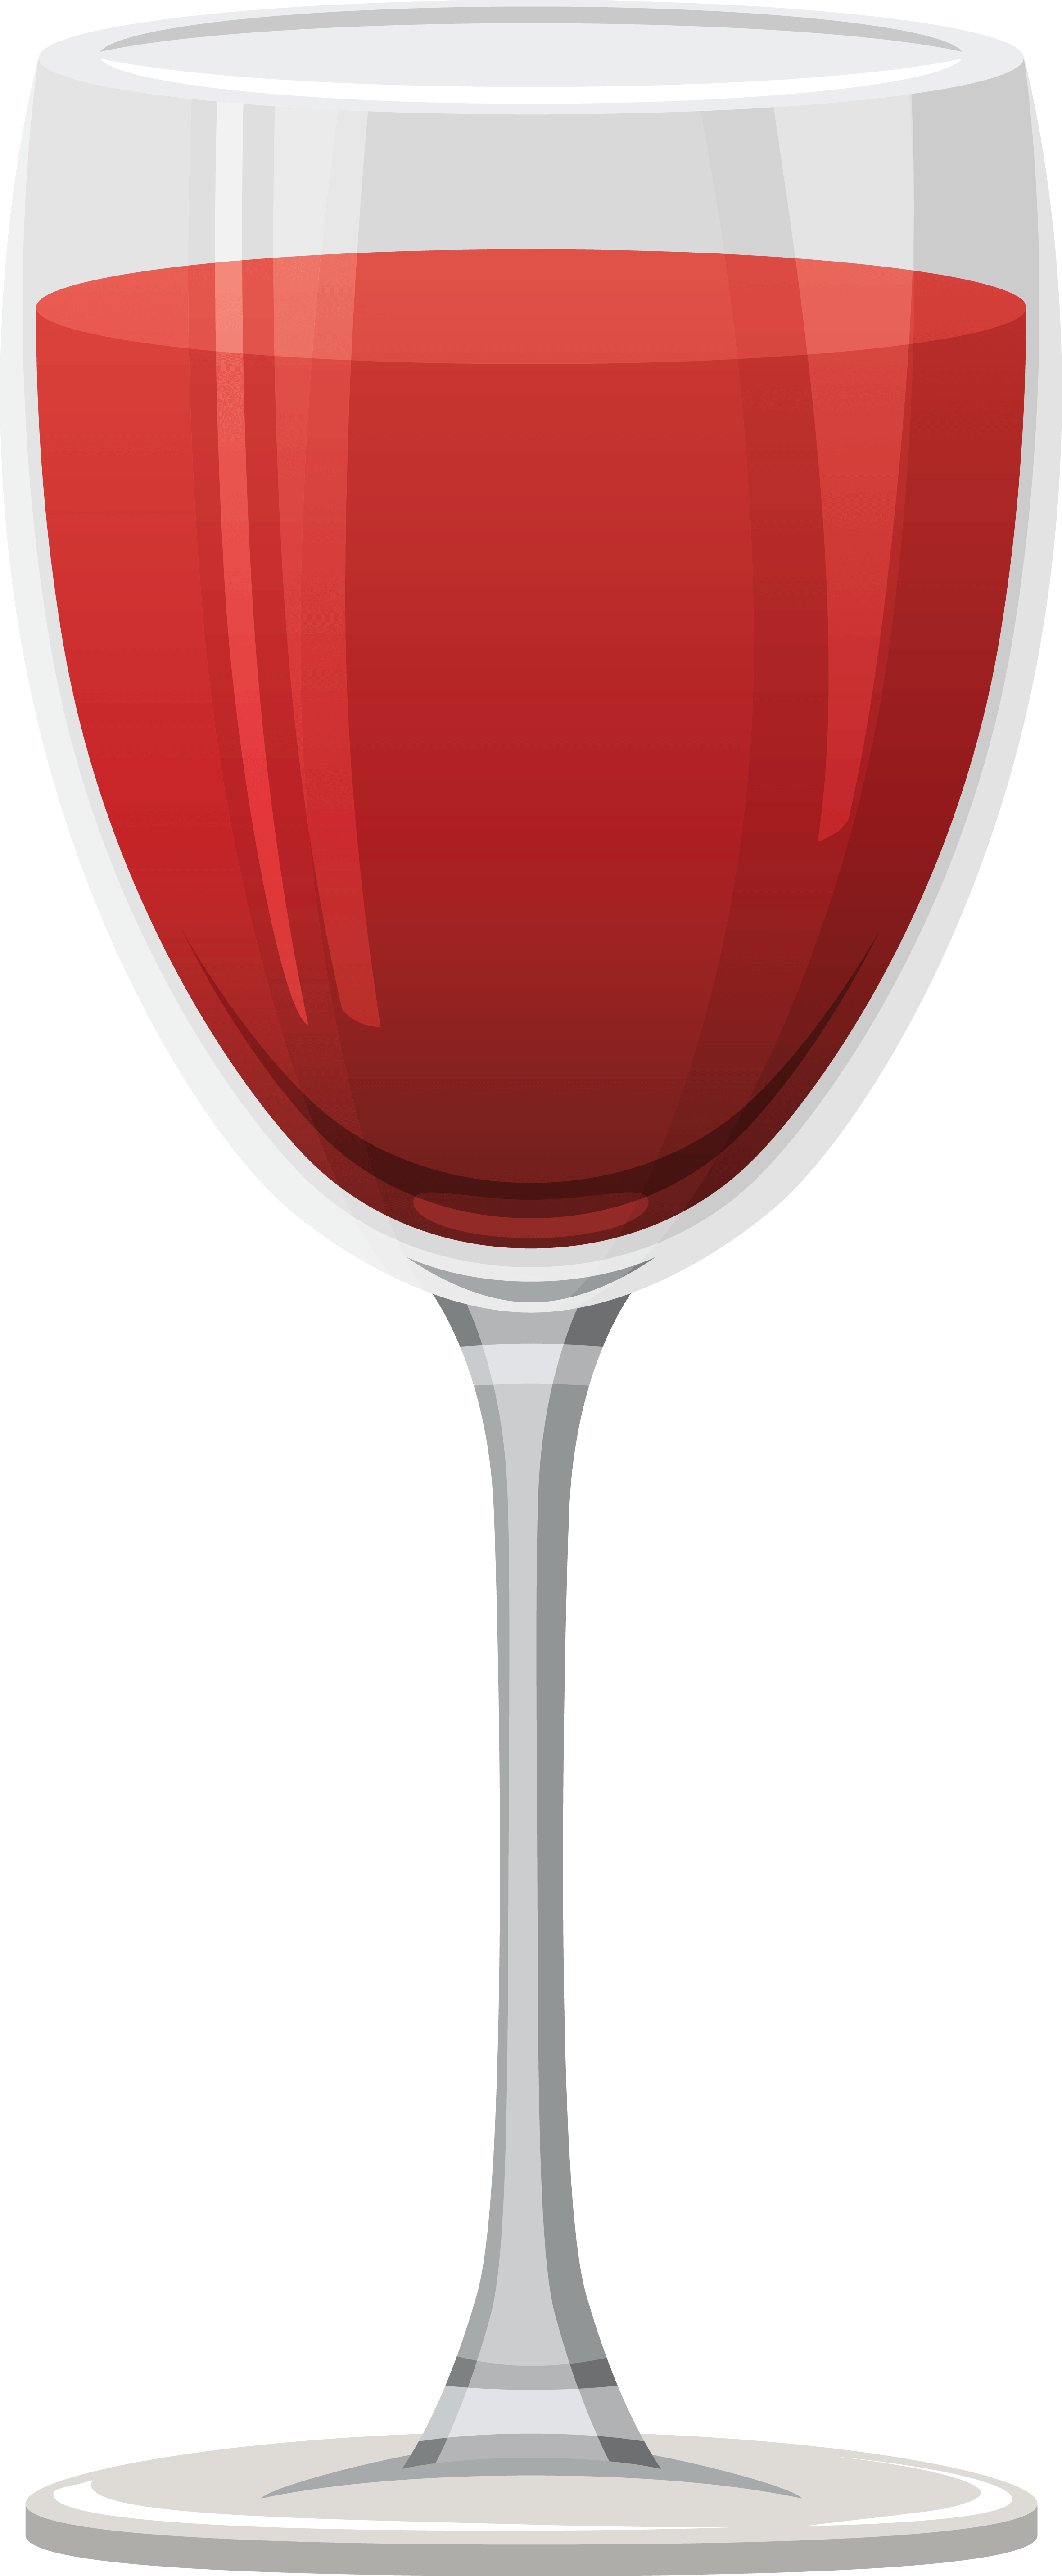 Red Wine Glass Png Image PNG Image